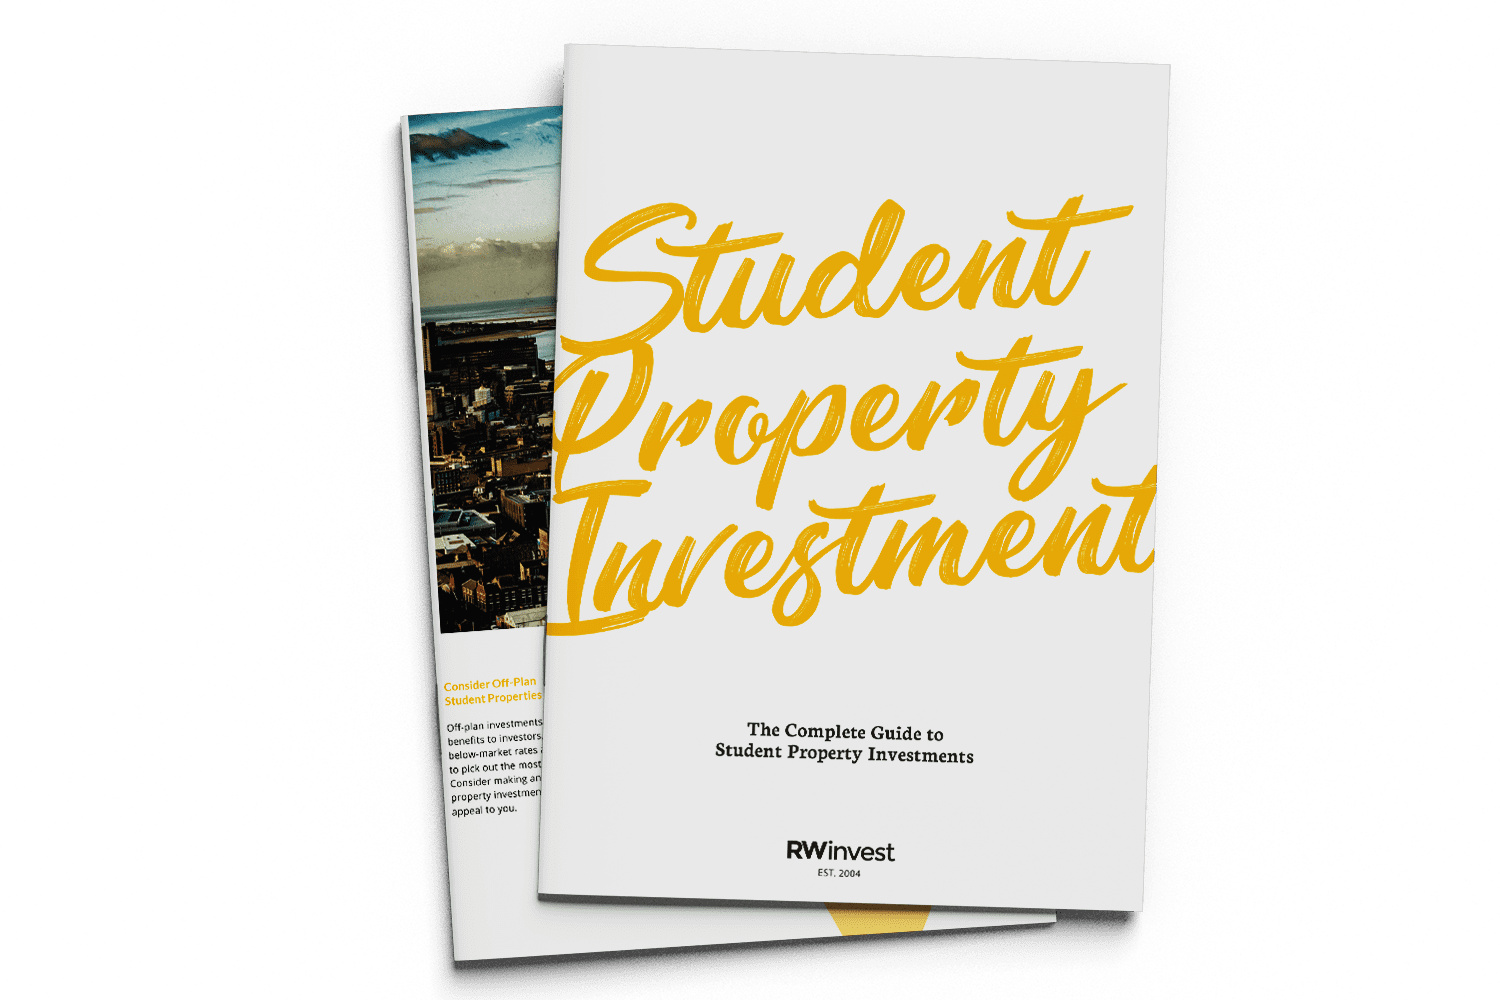 Student property investment guide